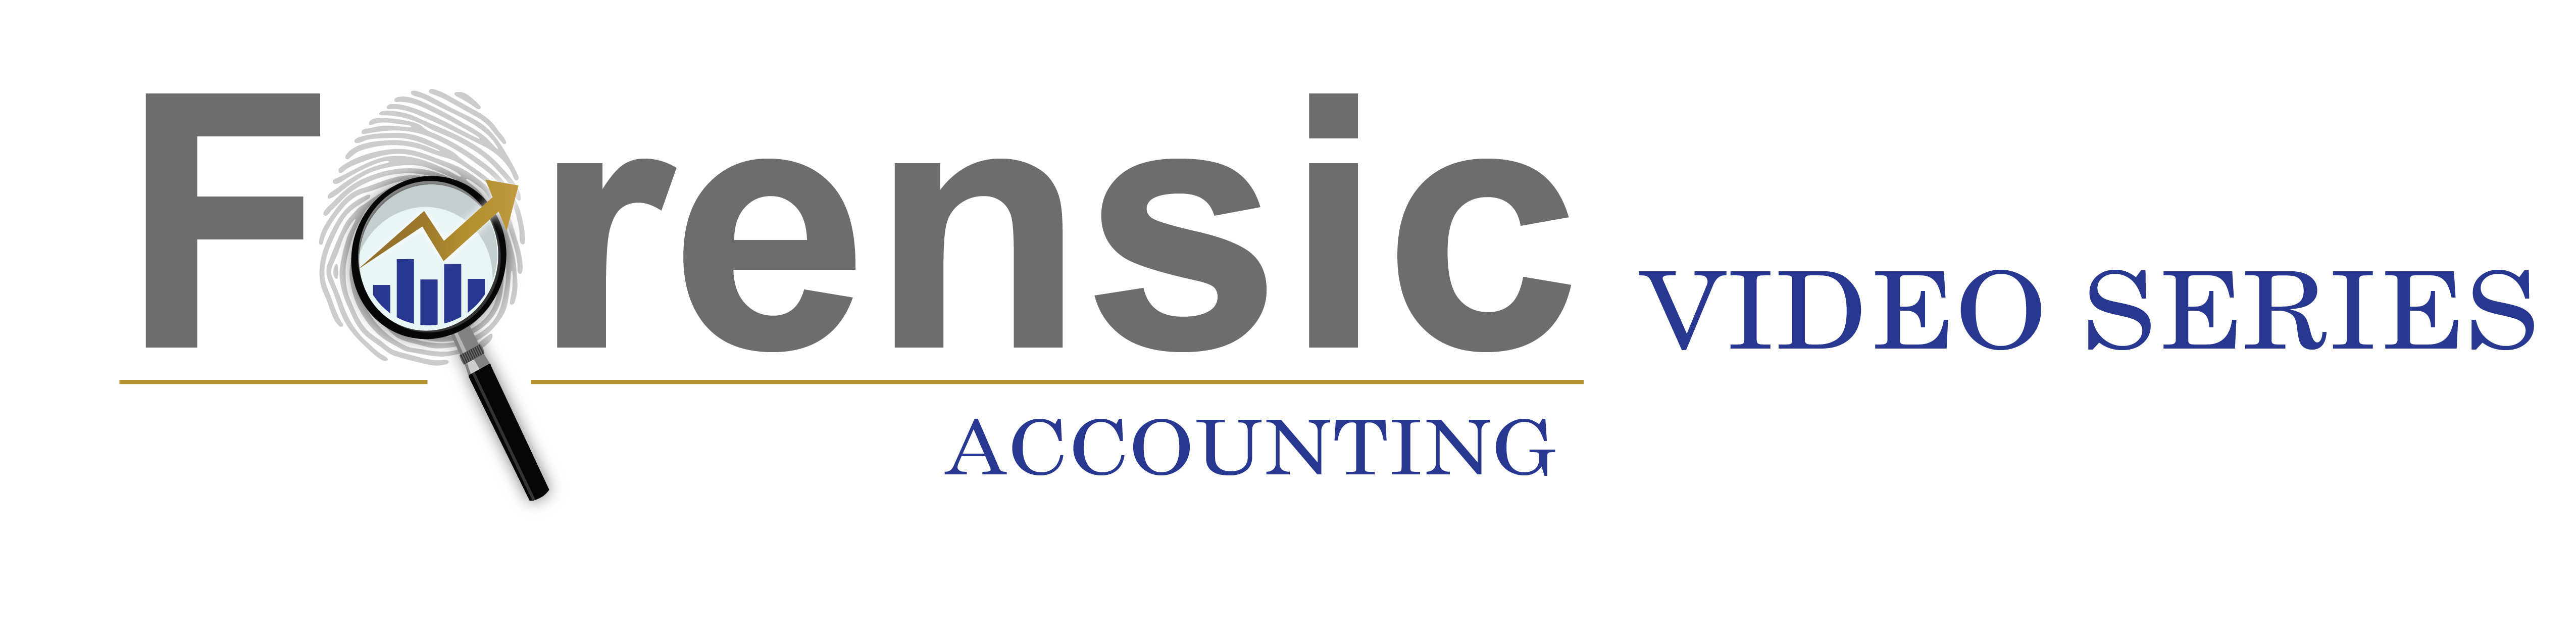 Forensic Accounting Video series